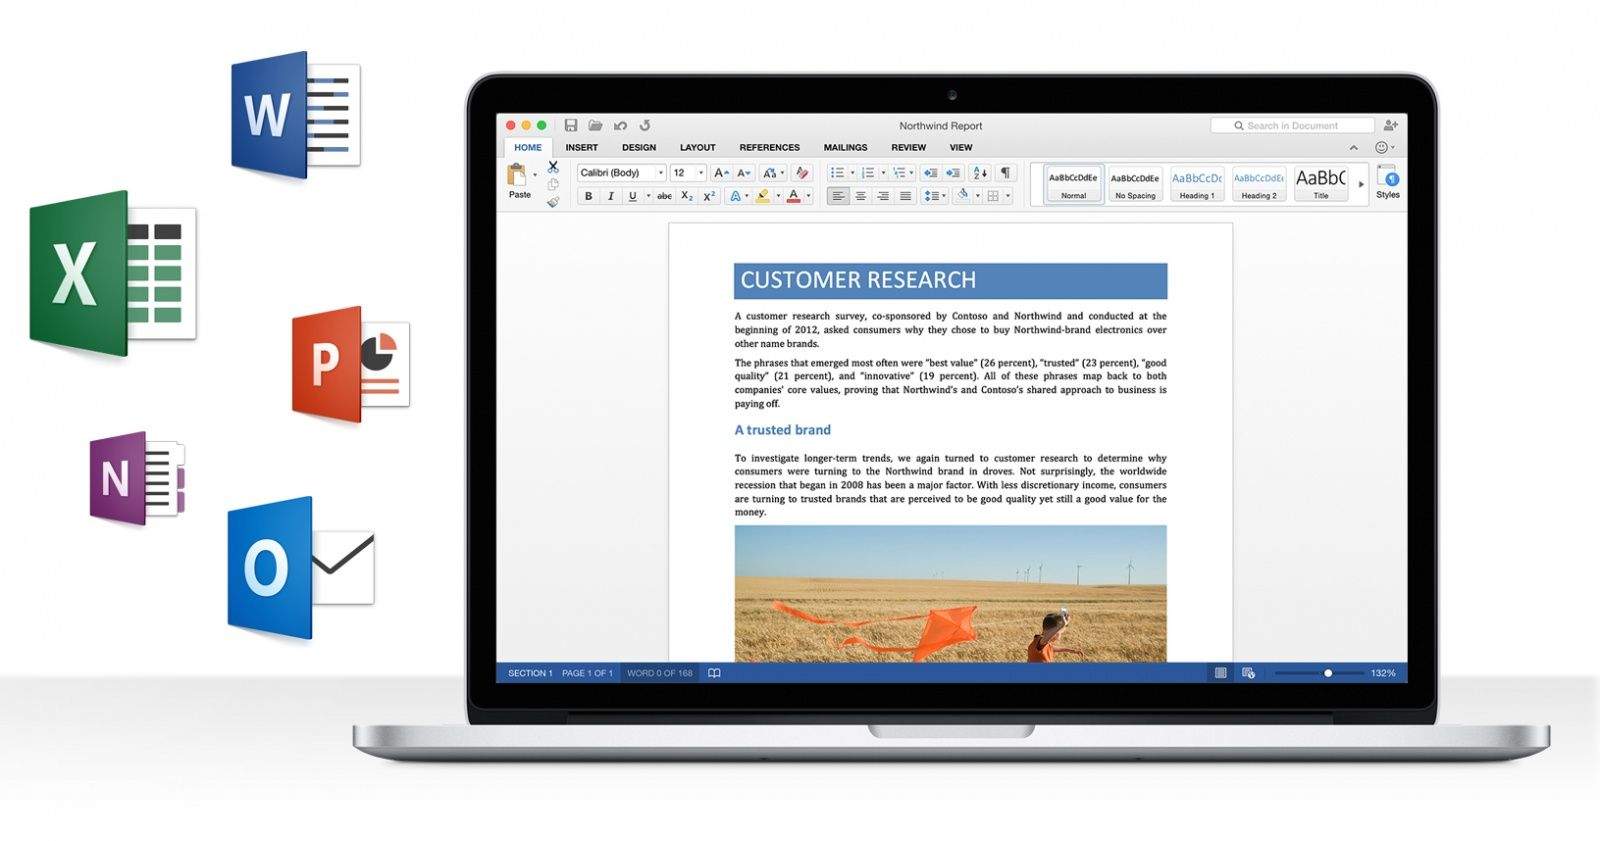 Microsoft Office 2016 for Mac preview is now available for free | Cult